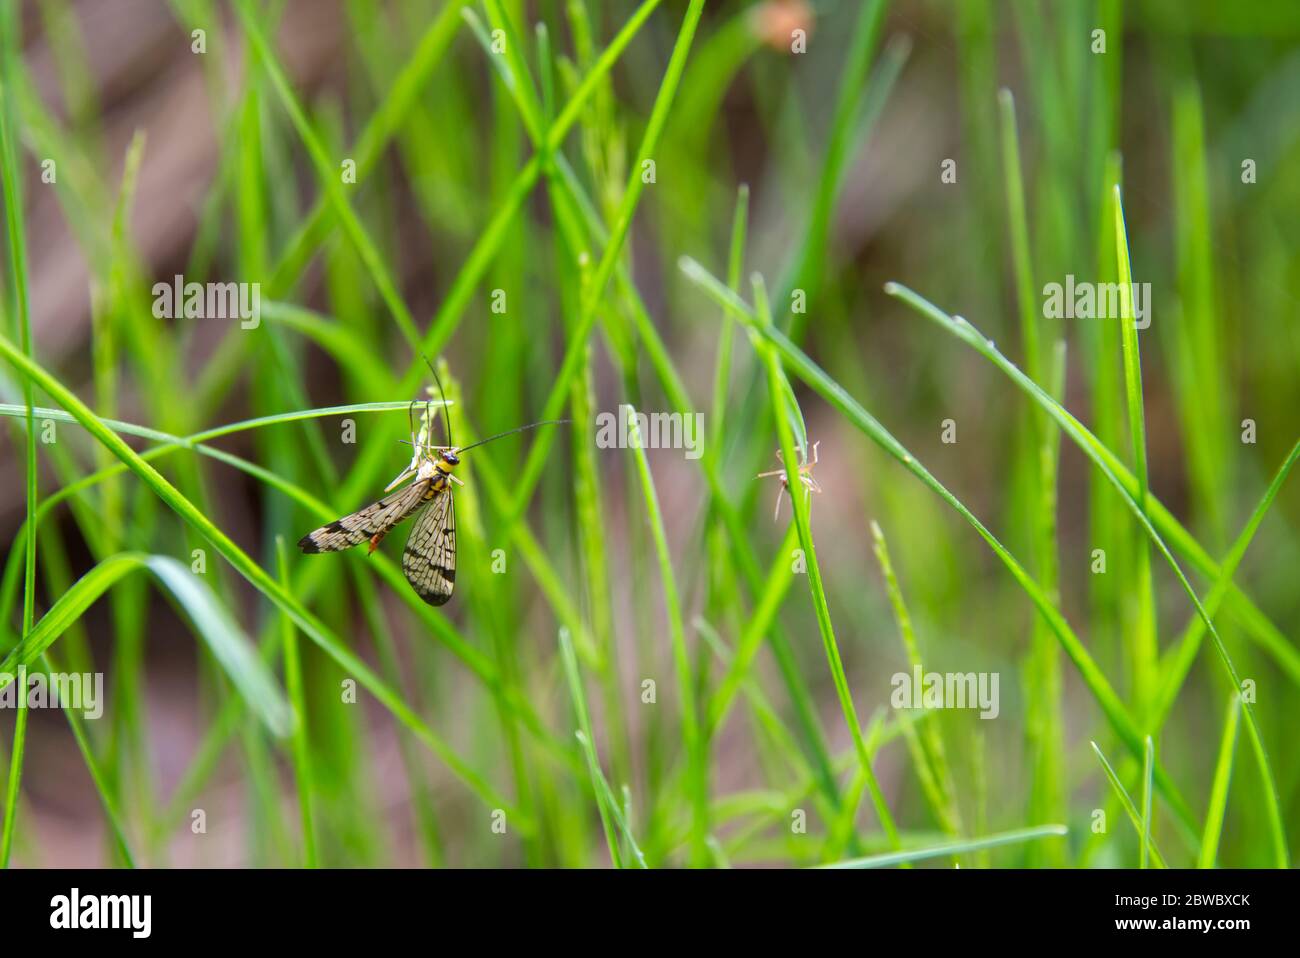 Multicolored mosquito, spring insects on a green grass background Stock Photo